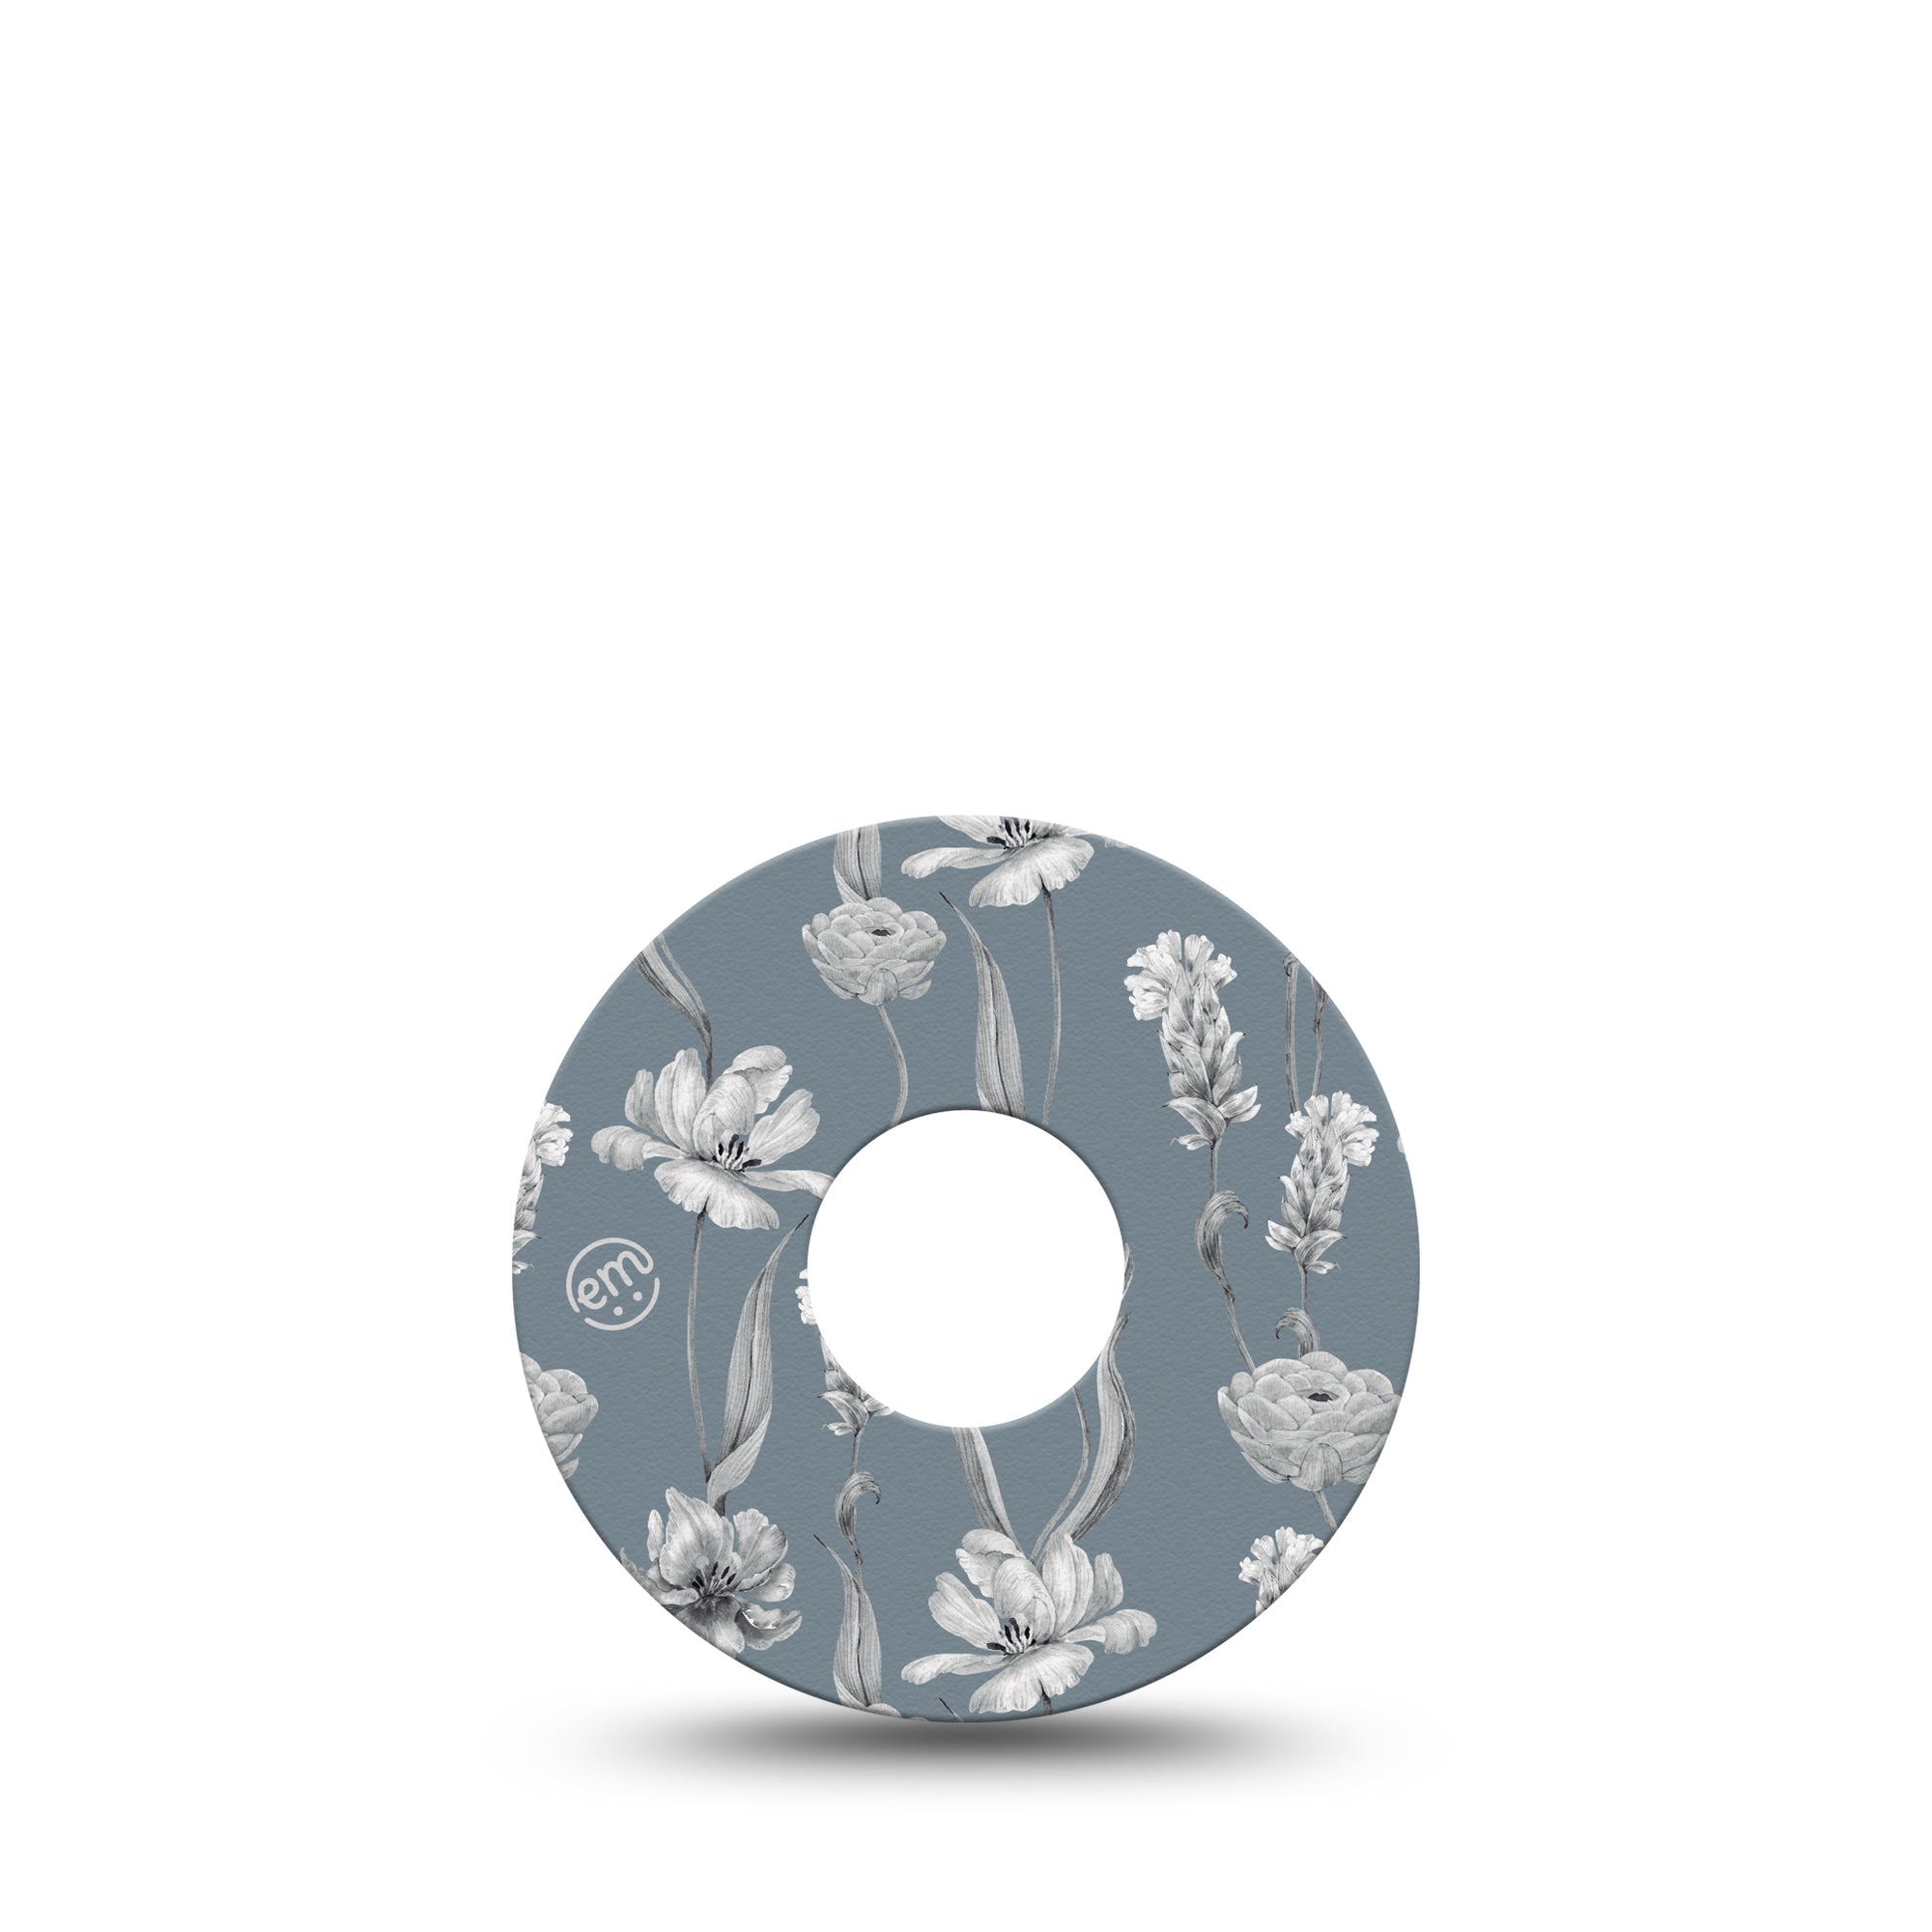 ExpressionMed Muted Petals Libre 3 Tape, Single, Muted Tone Flowers Floral Themed, CGM Patch Design